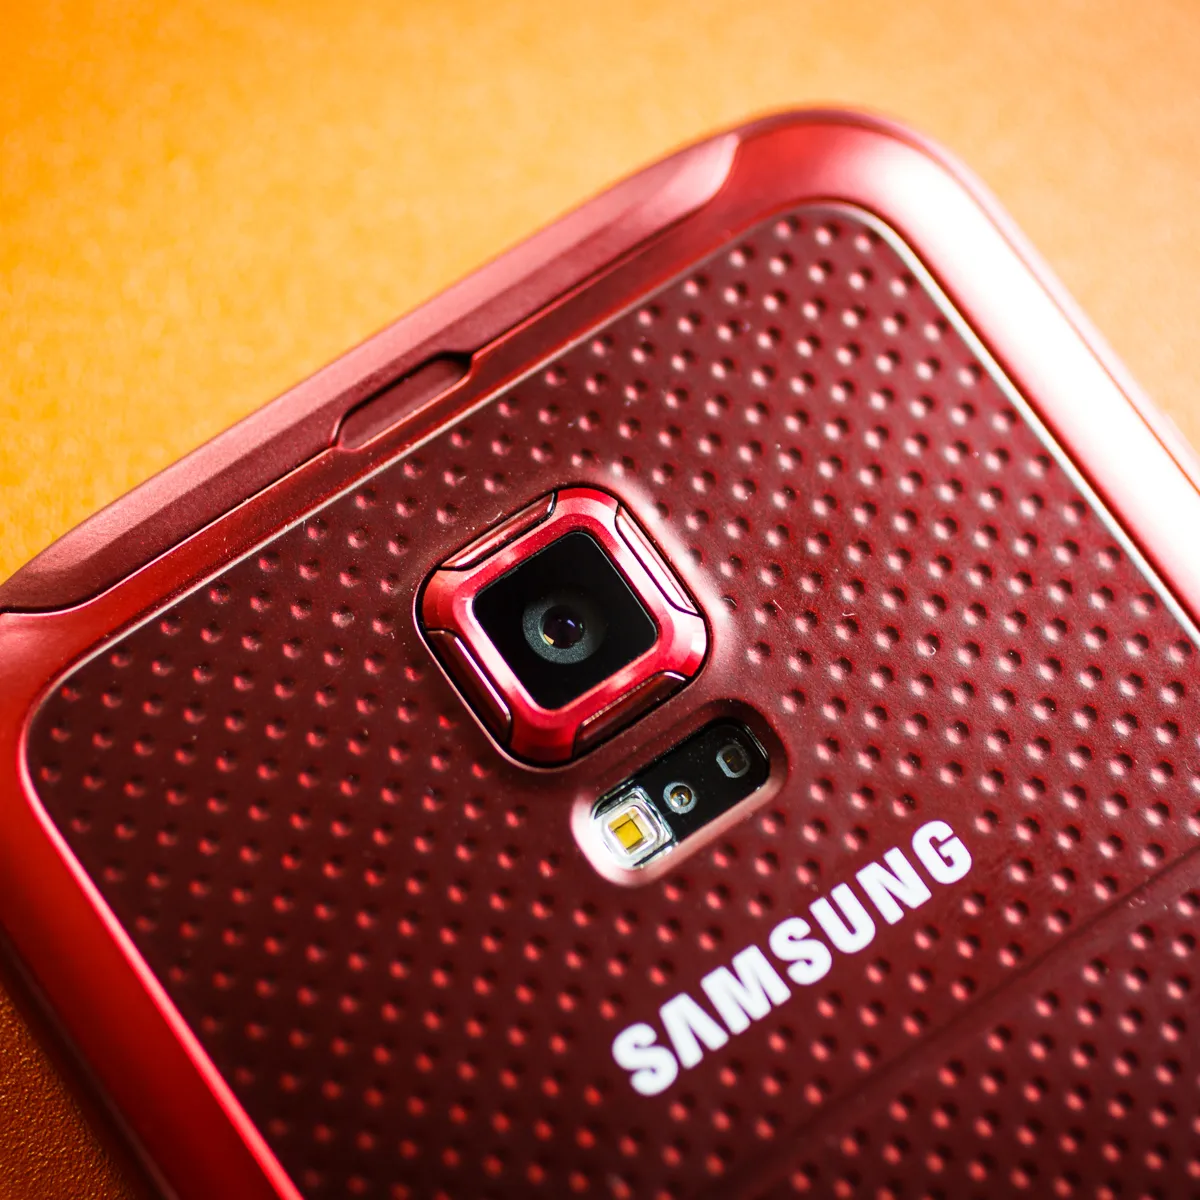 Fix Unfortunately, Samsung Account has stopped On Samsung Galaxy S5 Sport